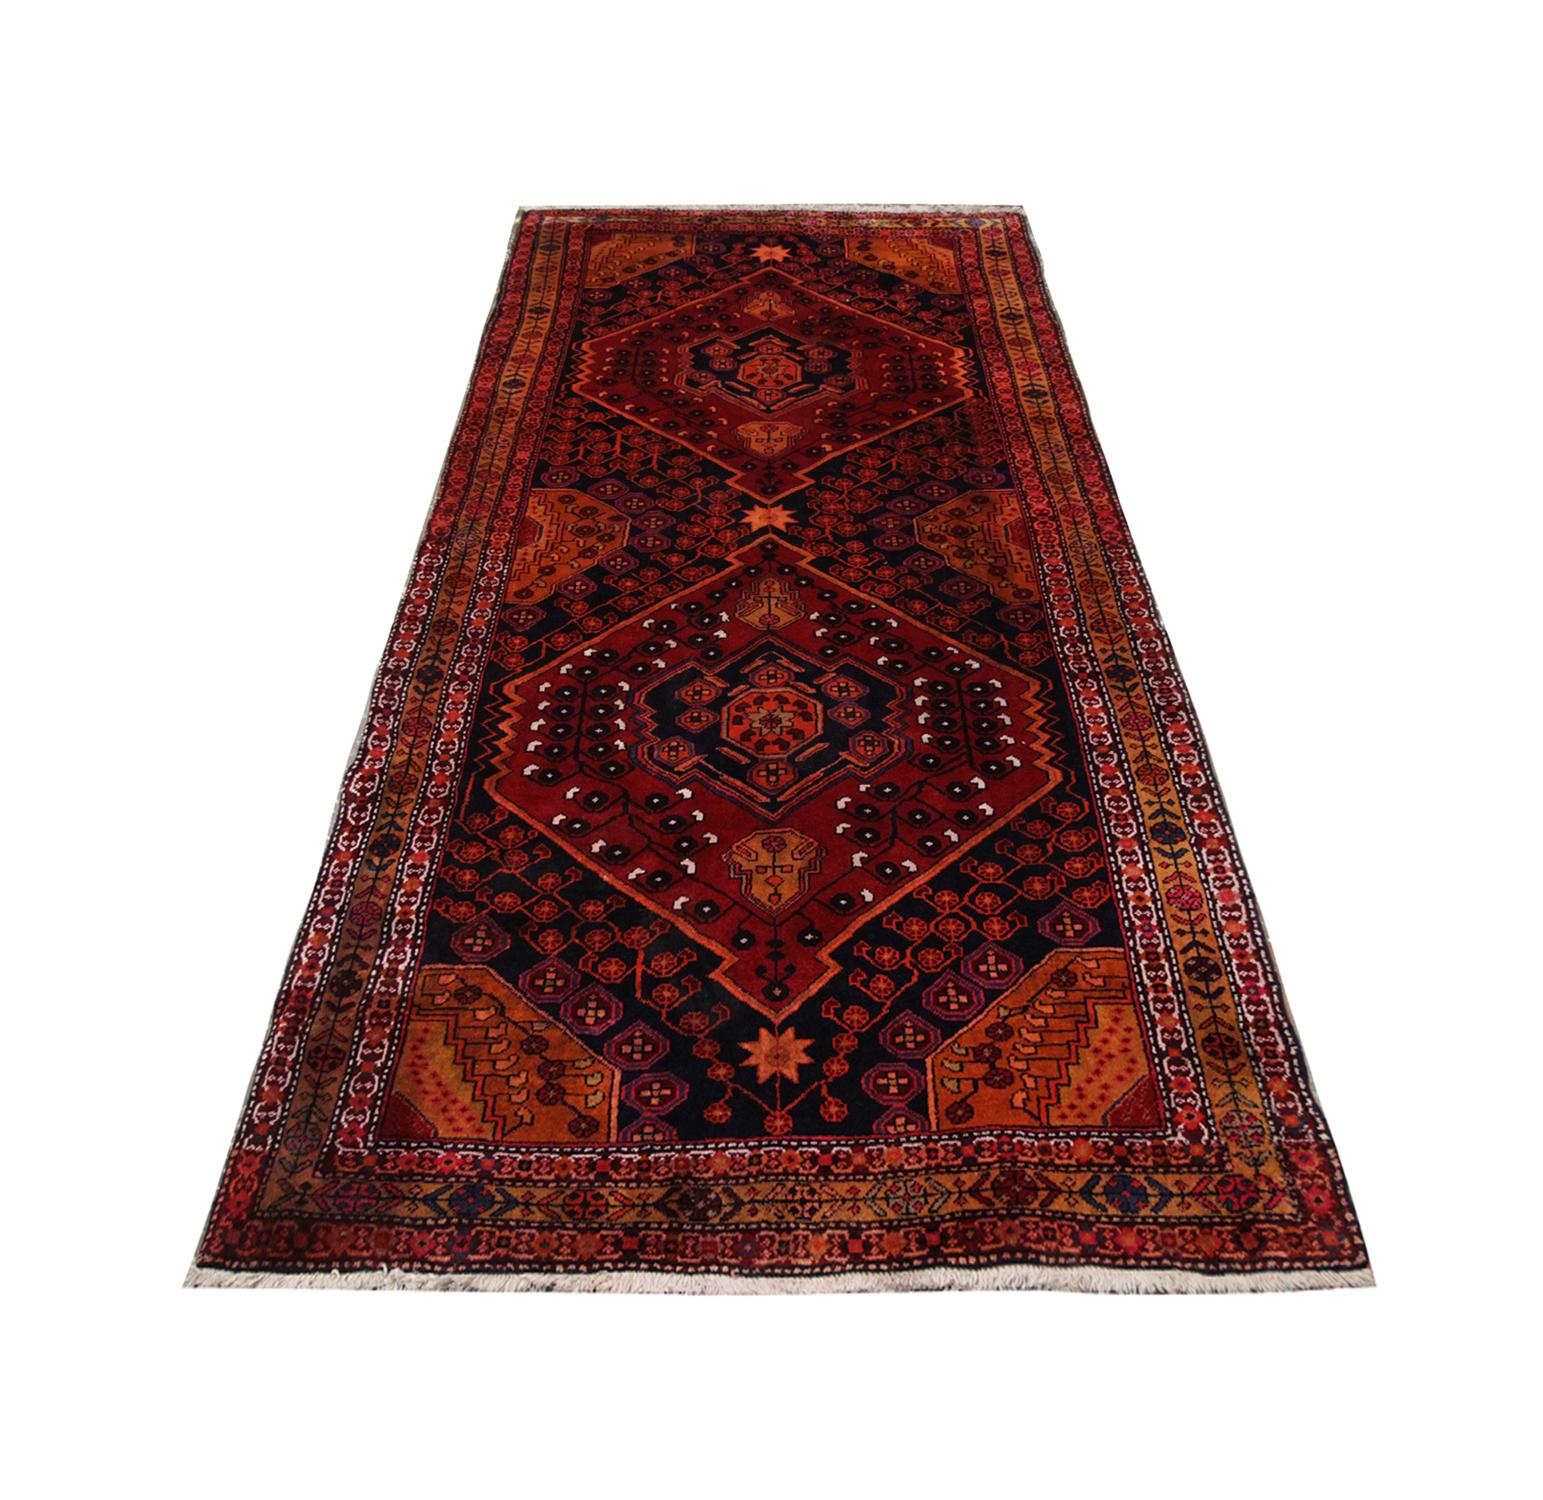 Deep reds and burnt oranges have been used to hand knot this stunning area rug. Two diamond-like shapes sit in the centre of this rug as the main emblems. It is designed with intricate details throughout the centre panel and borders. Subtle hints of